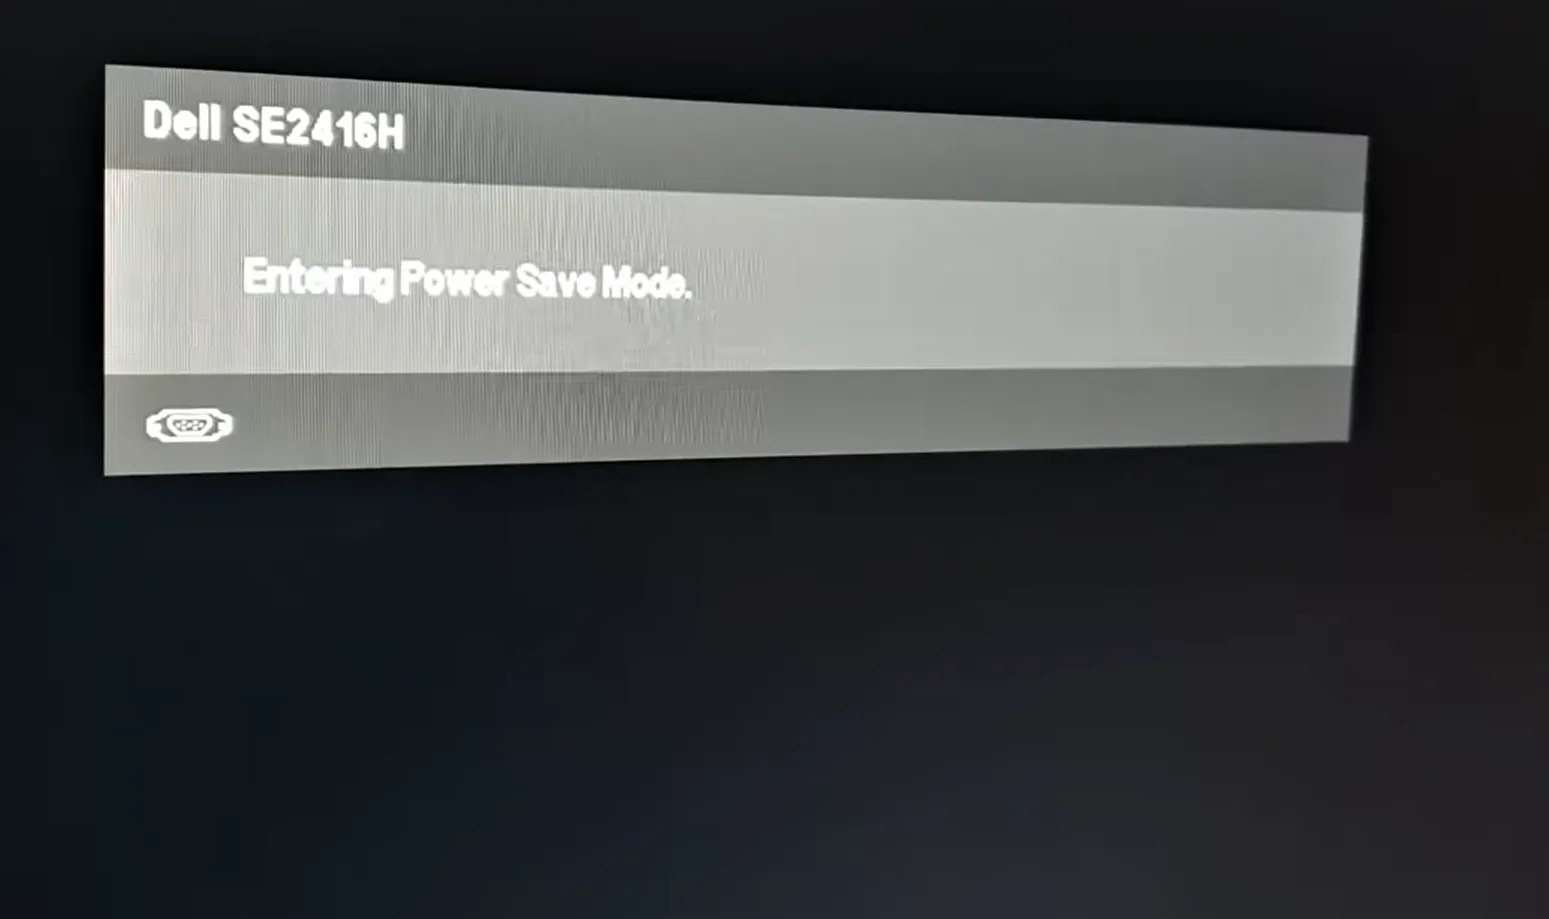 Power Save Mode on Dell